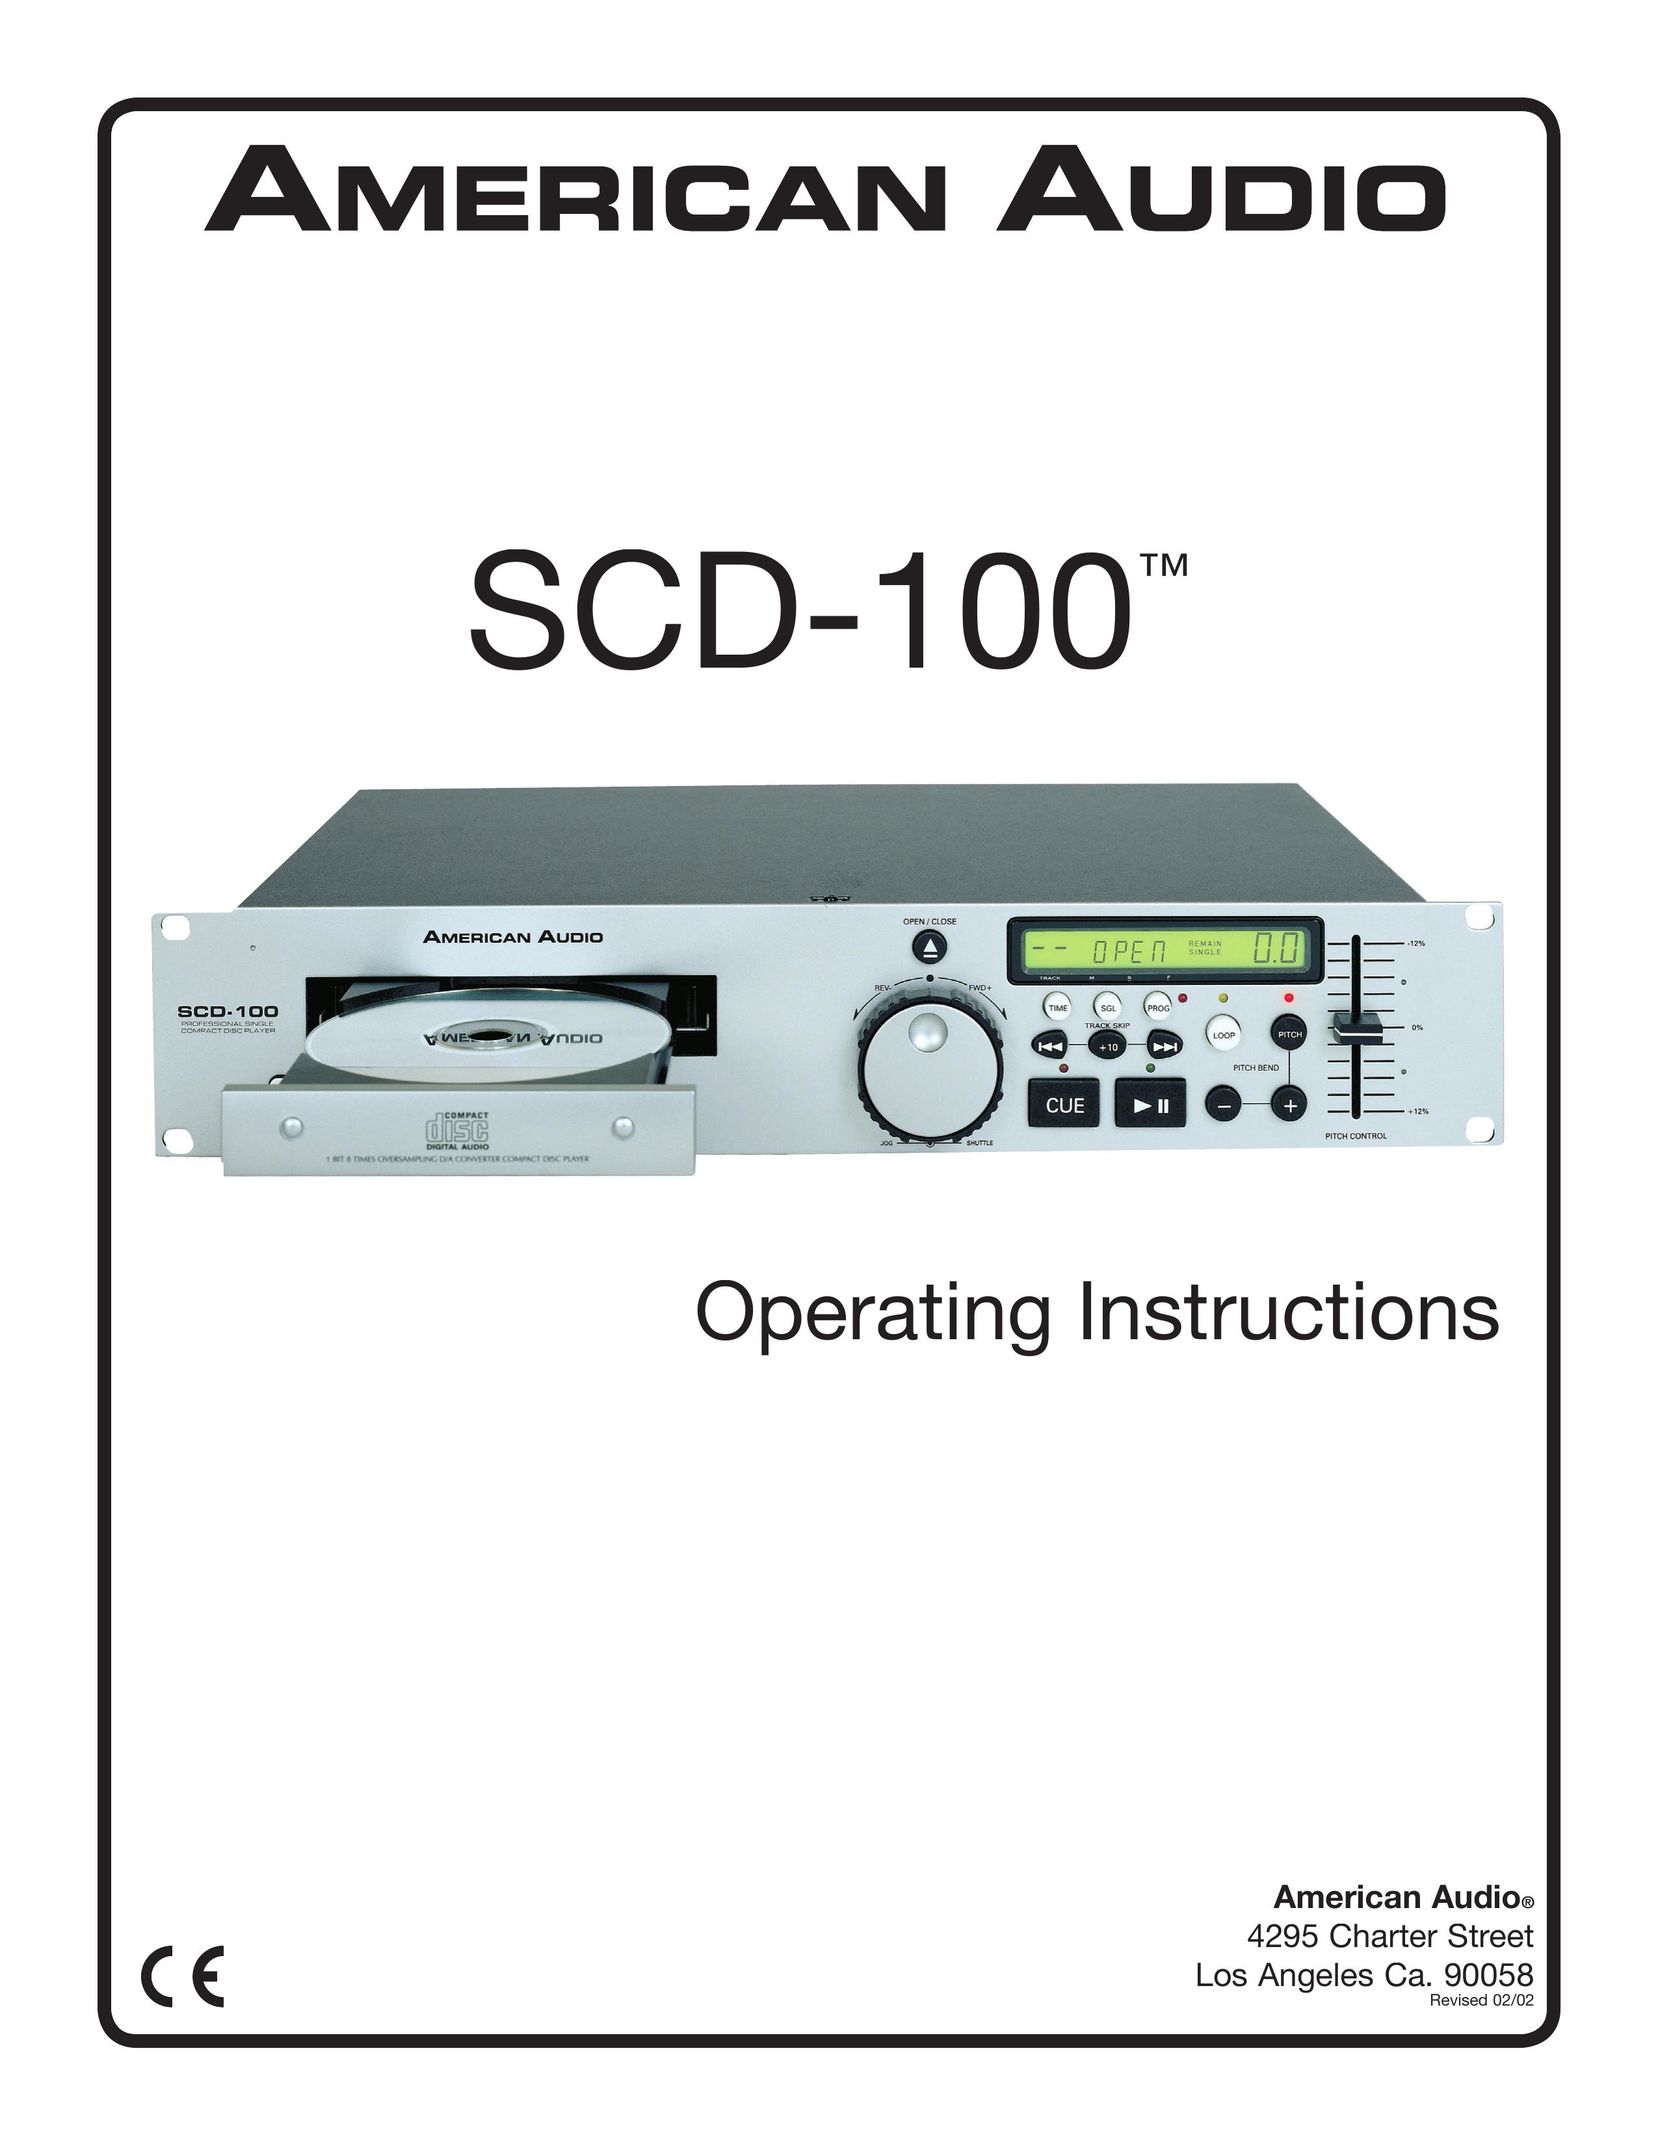 American Audio SCD-100 CD Player User Manual (Page 1)